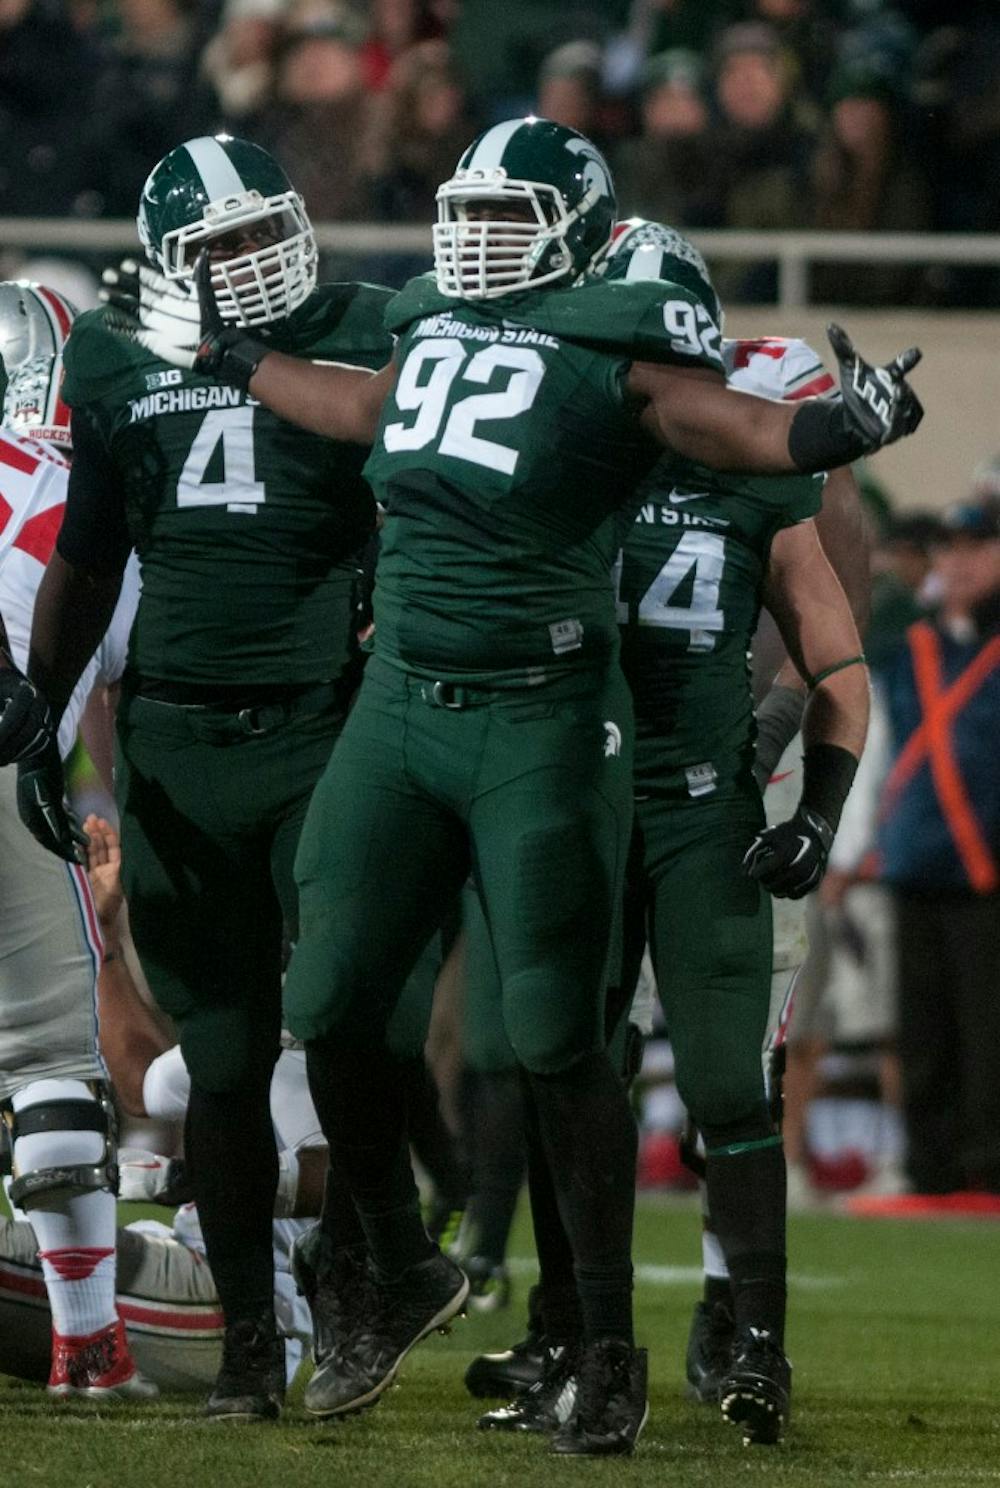 <p>Junior defensive lineman Joel Heath celebrates after his sack on Ohio State quarterback J.T. Barrett during the game on Nov. 8, 2014, at Spartan Stadium. The Spartans were defeated by the Buckeyes, 49-37. Raymond Williams/The State News</p>